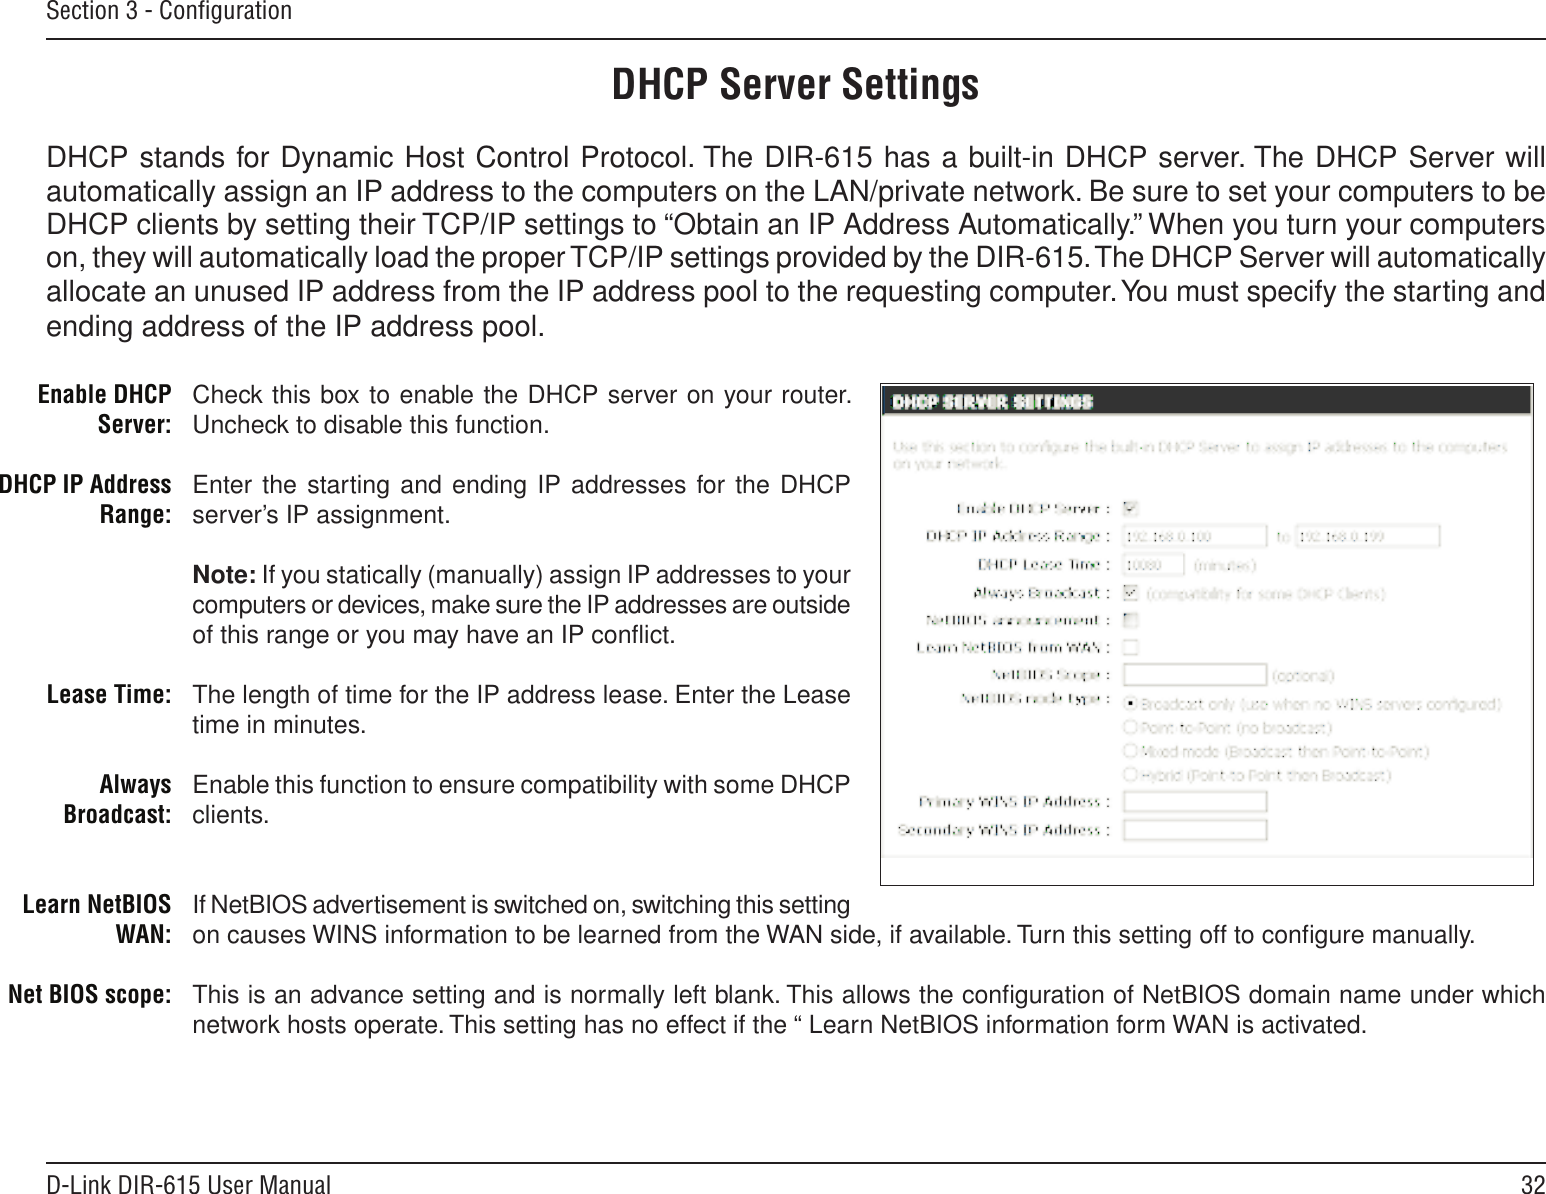 32D-Link DIR-615 User ManualSection 3 - ConﬁgurationCheck this box to enable the DHCP server on your router. Uncheck to disable this function.Enter the starting and ending IP addresses for the DHCP server’s IP assignment.Note: If you statically (manually) assign IP addresses to your computers or devices, make sure the IP addresses are outside of this range or you may have an IP conﬂict. The length of time for the IP address lease. Enter the Lease time in minutes.Enable this function to ensure compatibility with some DHCP clients.If NetBIOS advertisement is switched on, switching this setting on causes WINS information to be learned from the WAN side, if available. Turn this setting off to conﬁgure manually. This is an advance setting and is normally left blank. This allows the conﬁguration of NetBIOS domain name under which network hosts operate. This setting has no effect if the “ Learn NetBIOS information form WAN is activated.  Enable DHCP Server:DHCP IP Address Range:Lease Time:Always Broadcast:Learn NetBIOS WAN:Net BIOS scope: DHCP Server SettingsDHCP stands for Dynamic Host Control Protocol. The DIR-615 has a built-in DHCP server. The DHCP Server will automatically assign an IP address to the computers on the LAN/private network. Be sure to set your computers to be DHCP clients by setting their TCP/IP settings to “Obtain an IP Address Automatically.” When you turn your computers on, they will automatically load the proper TCP/IP settings provided by the DIR-615. The DHCP Server will automatically allocate an unused IP address from the IP address pool to the requesting computer. You must specify the starting and ending address of the IP address pool.